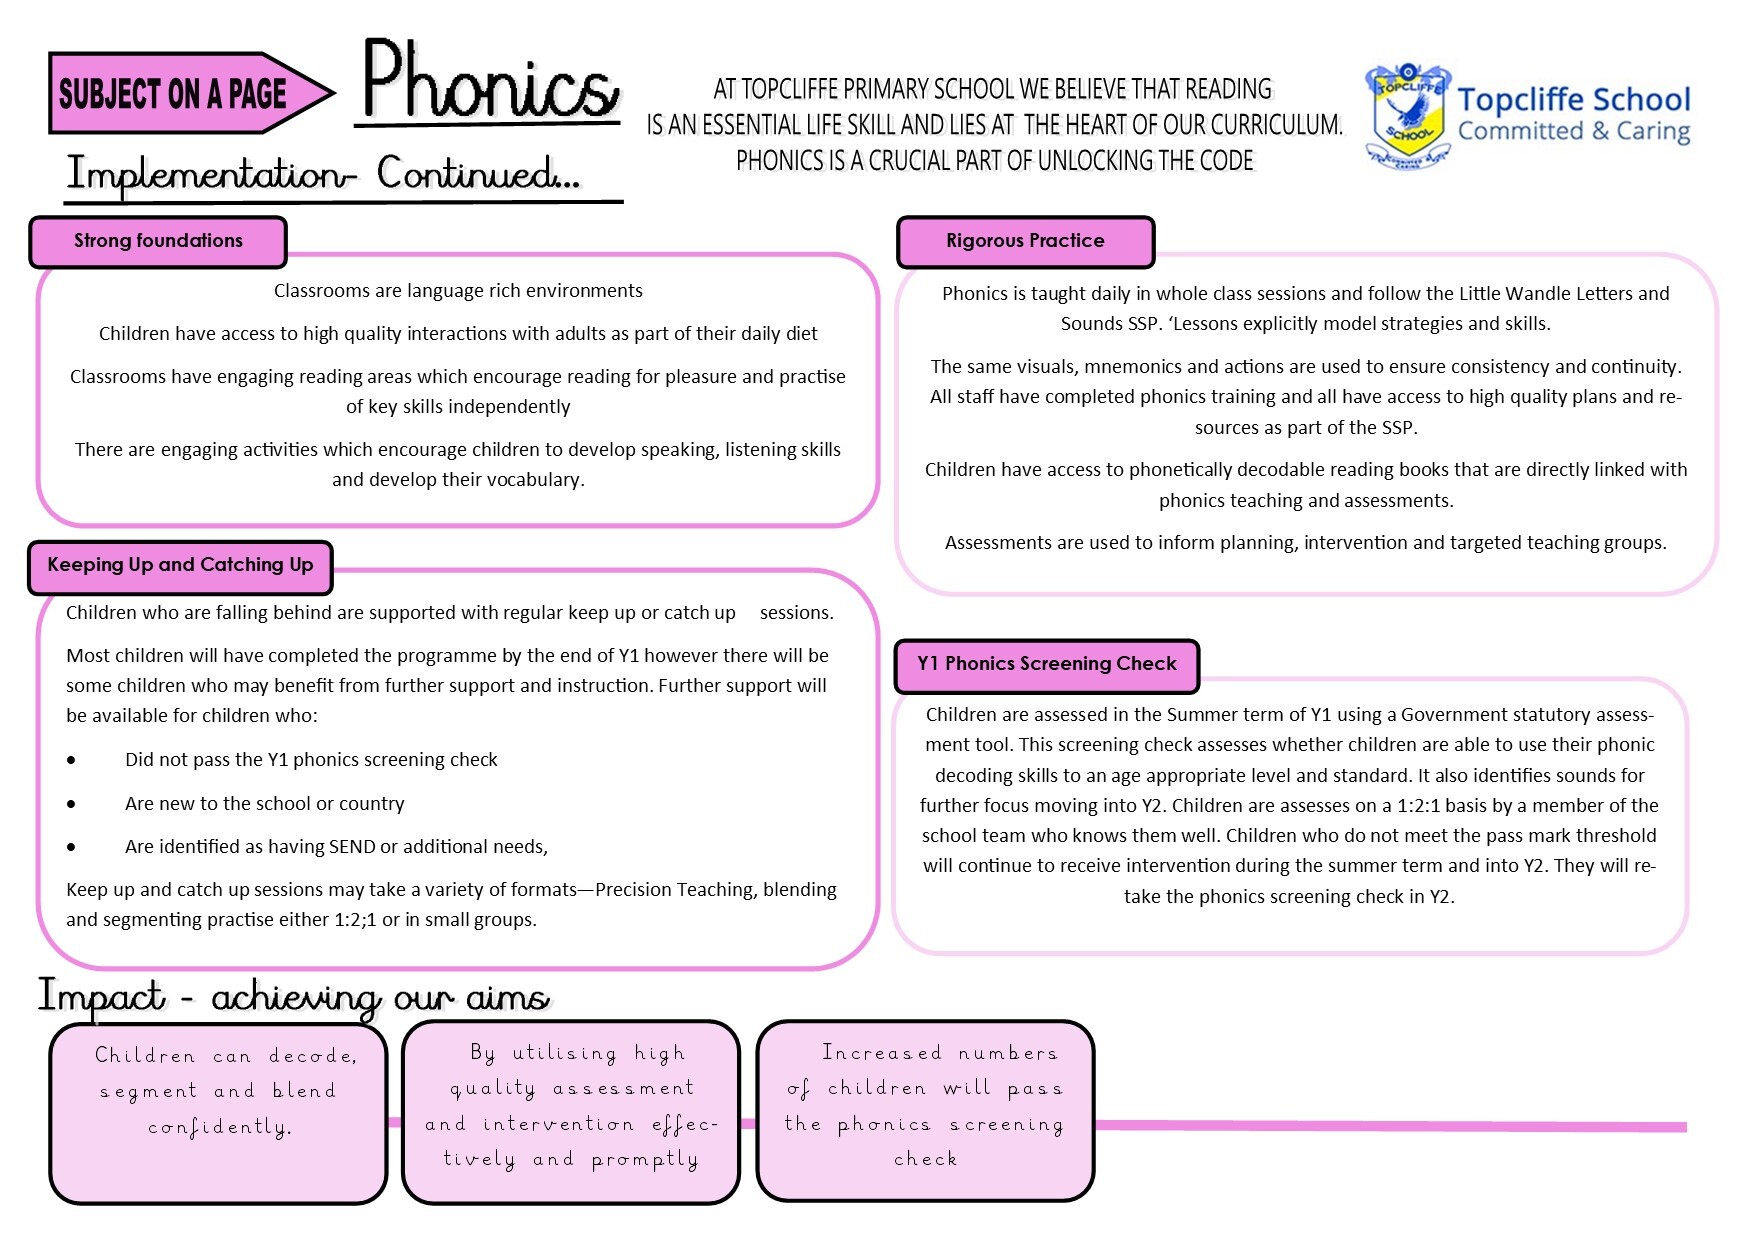 Phonics intent and implementation 2